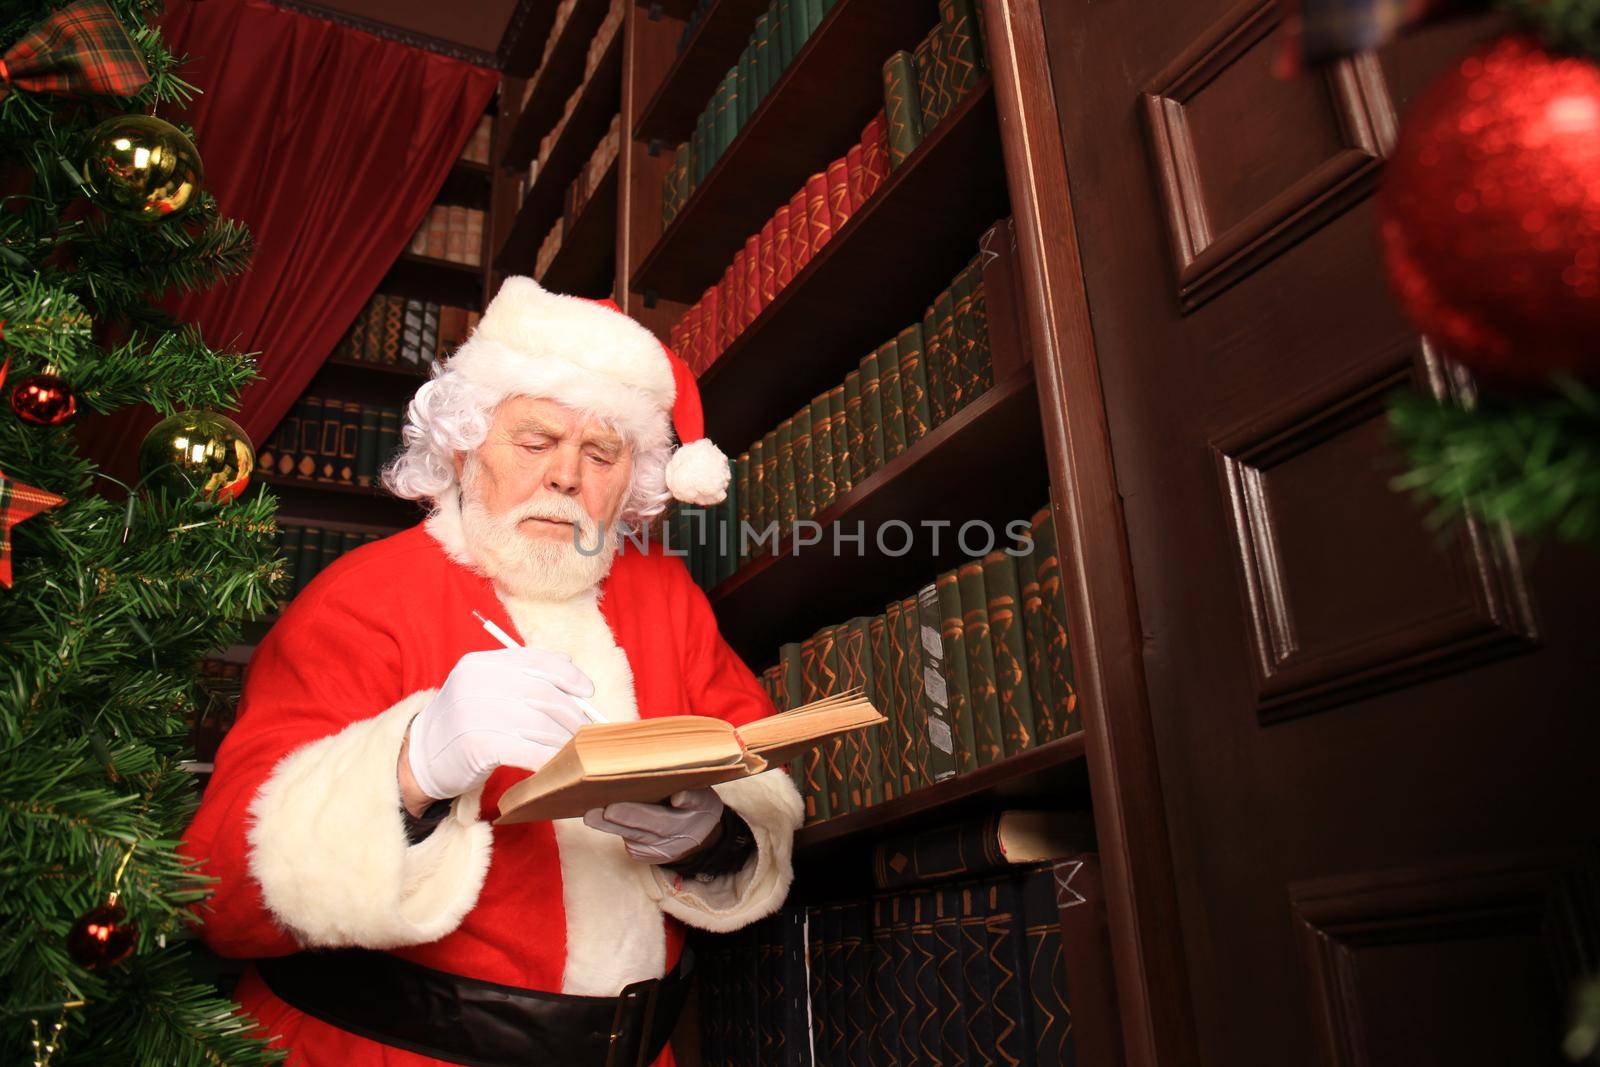 Santa standing at the Christmas tree and reading a book.